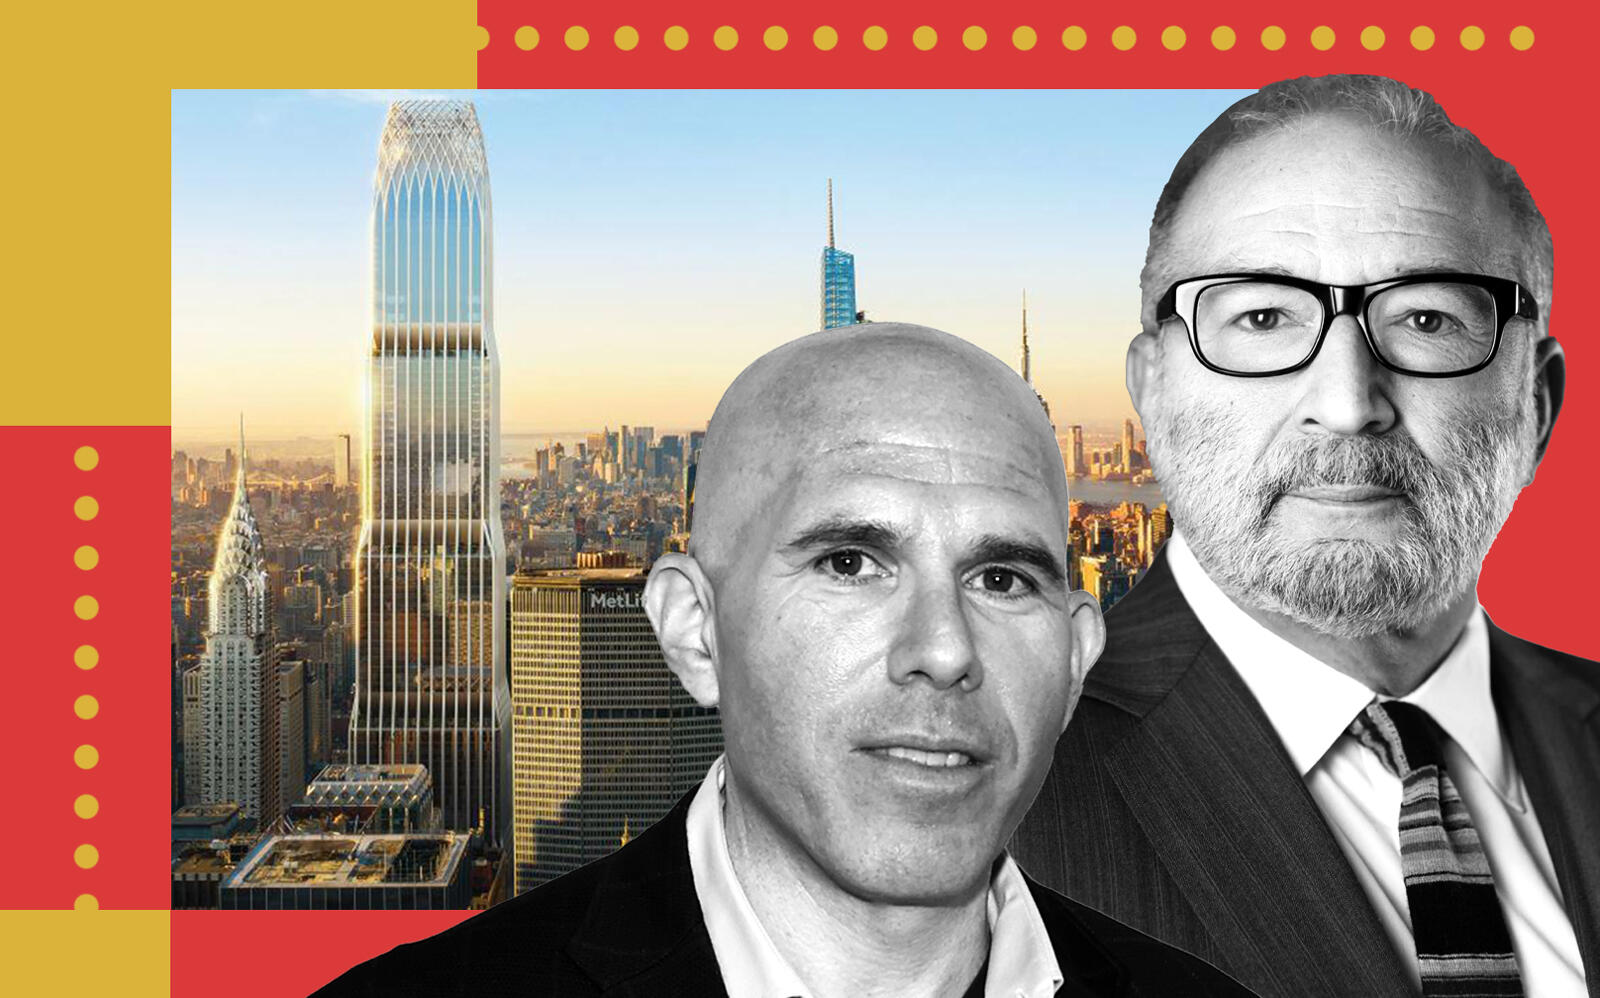 175 Park Avenue with RXR Realty's Scott Rechler and TF Cornerstone’s Frederick Elghanayan (SOM Architects, Getty, TF Cornerstone)